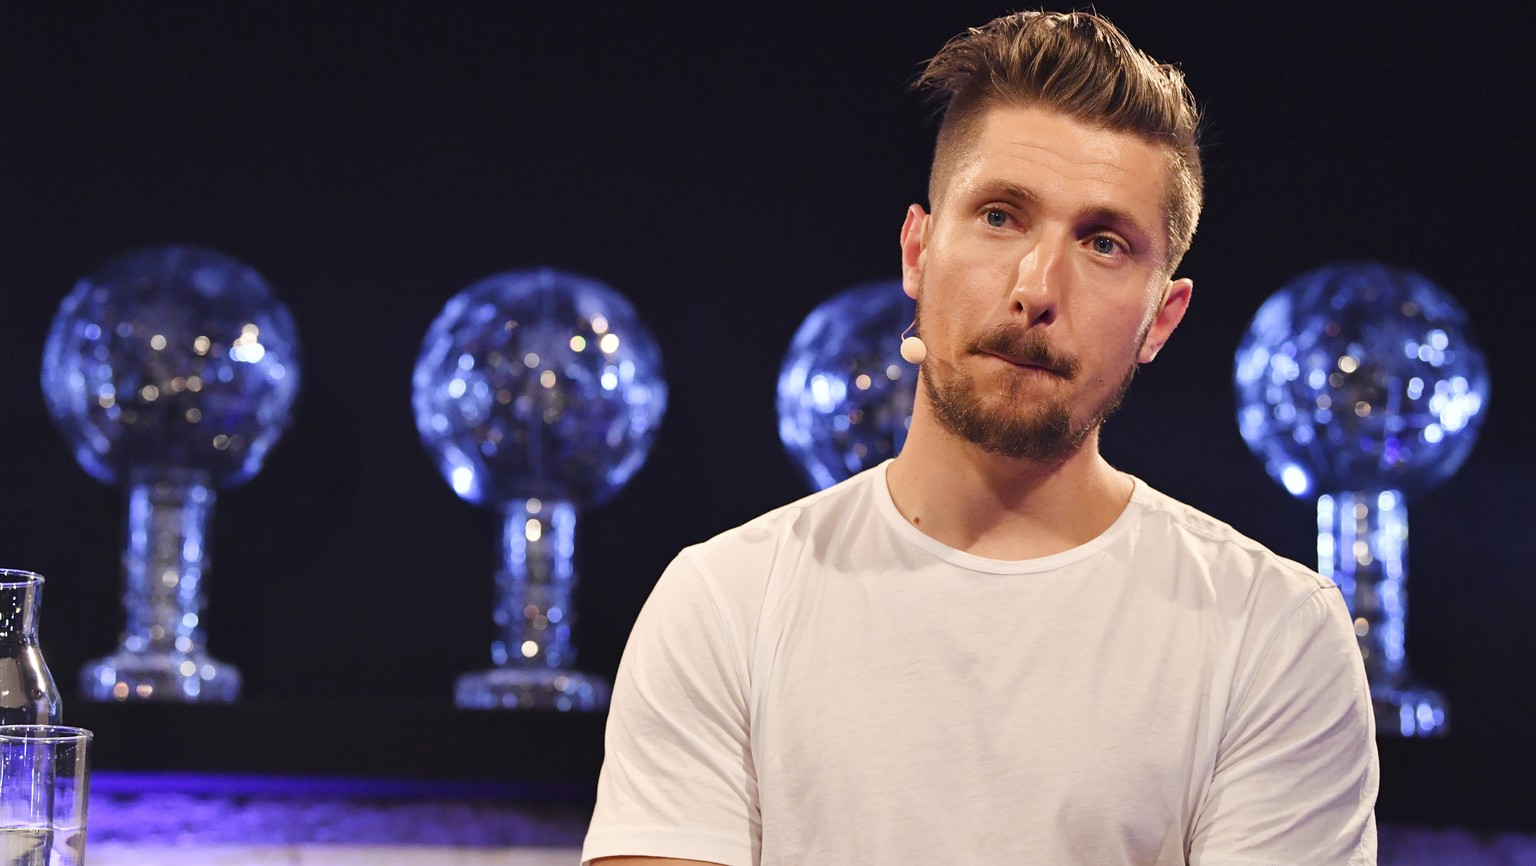 Austria&#039;s ski star Marcel Hirscher speaks during a press conference announcing the end of his skiing career in Salzburg, Austria, Wednesday, Sept.4, 2019. (AP Photo/Kerstin Joensson)